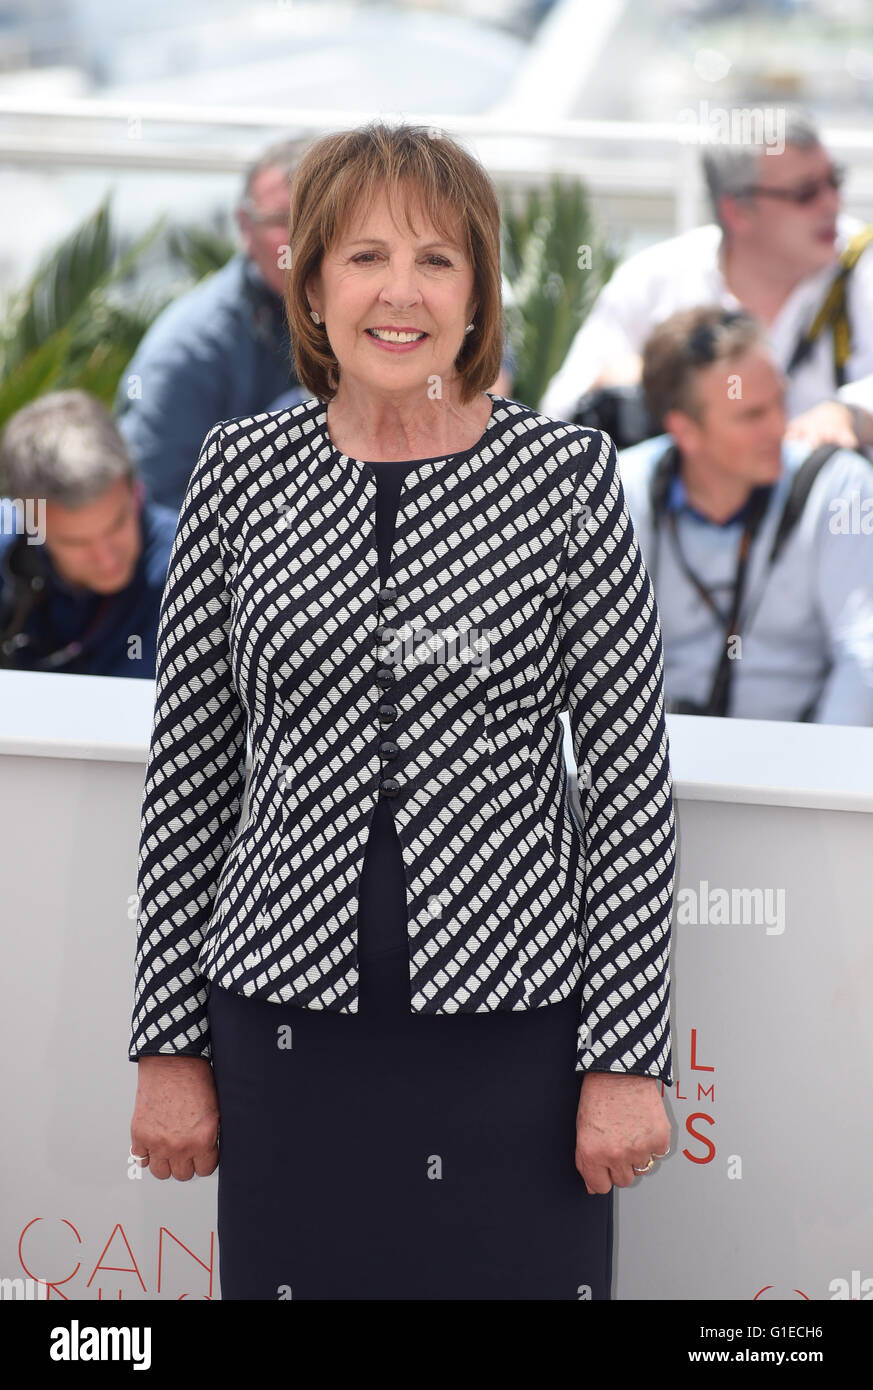 Cannes, France. 14th May, 2016. British actress Penelope Wilton pose during the photocall for 'The BFG' at the 69th annual Cannes Film Festival in Cannes, France, 14 May 2016. Photo: Felix Hoerhager/dpa/Alamy Live News Credit:  dpa picture alliance/Alamy Live News Stock Photo